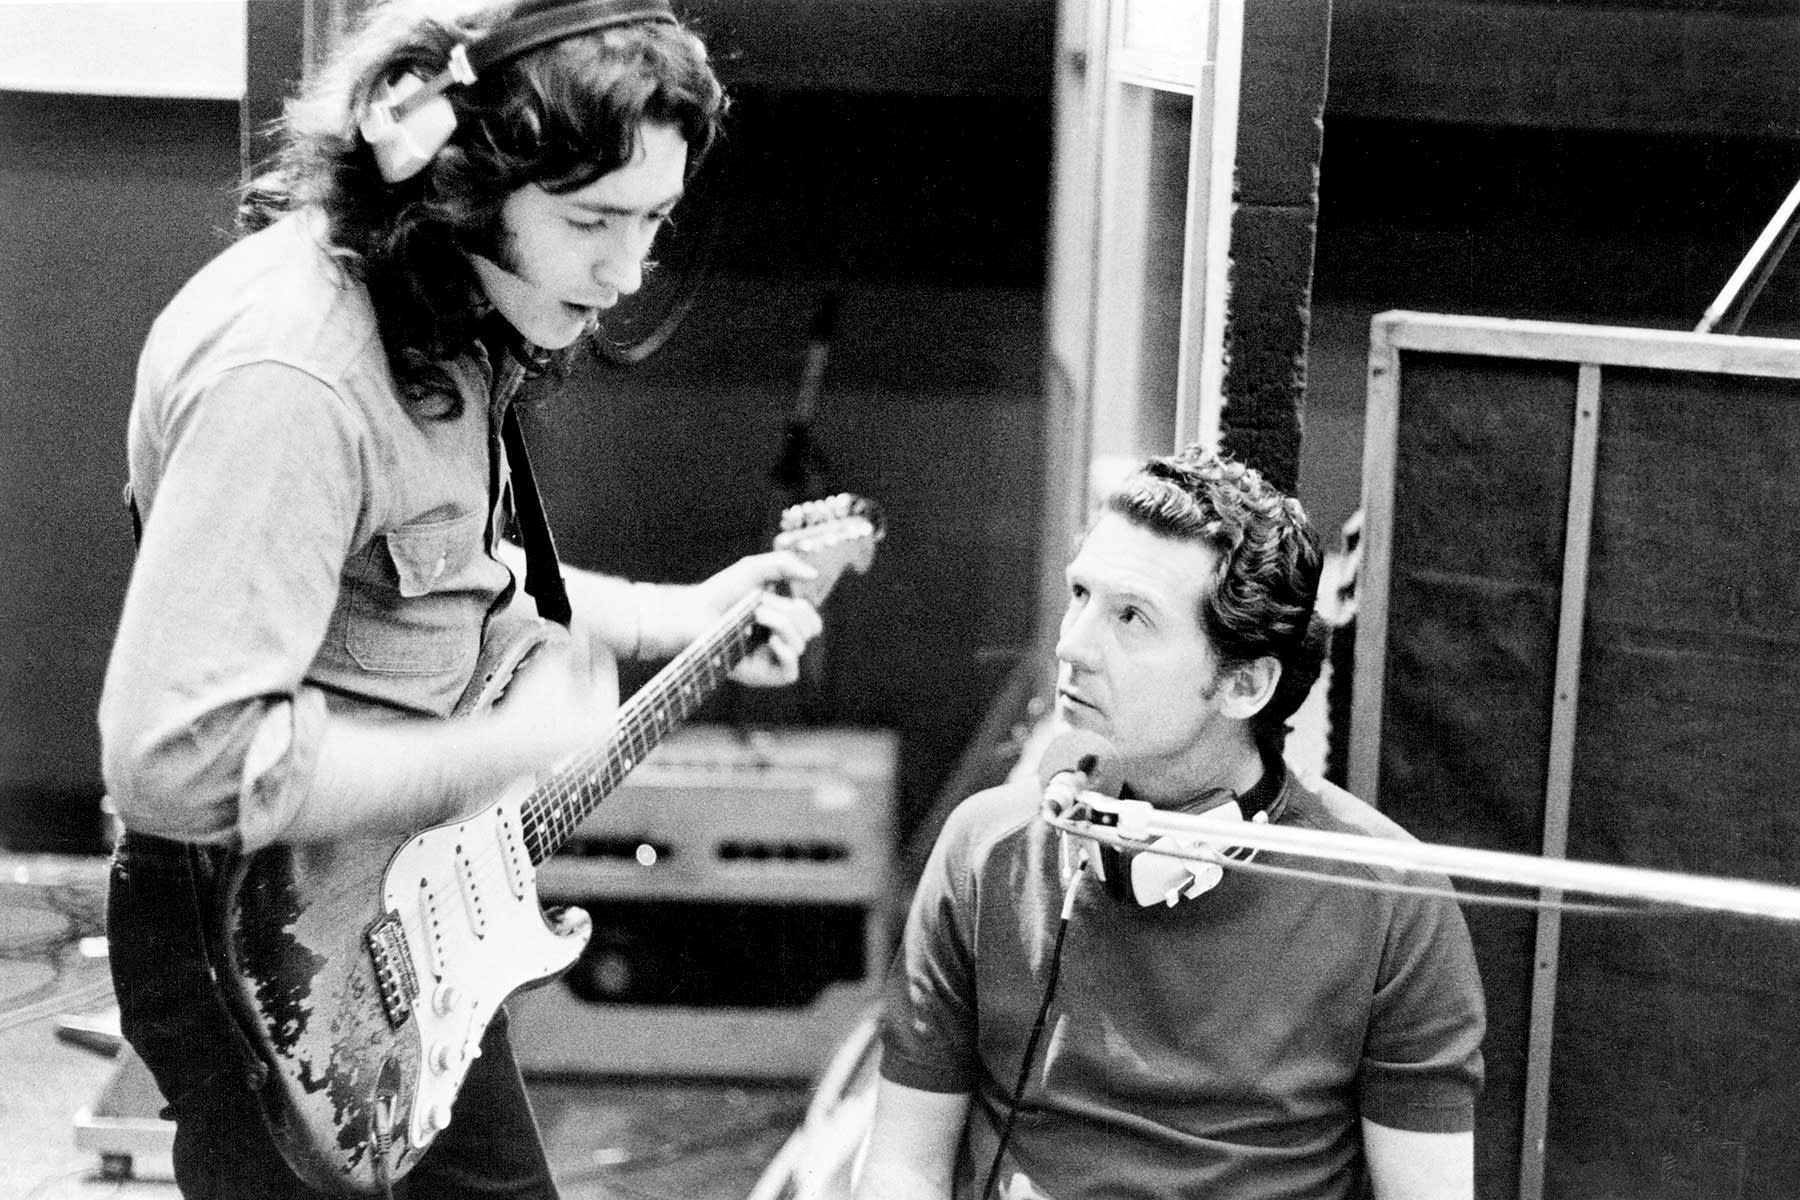 Hear Rory Gallagher Jerry Lee Lewis Unreleased Cover Of The Rolling Stones Satisfaction